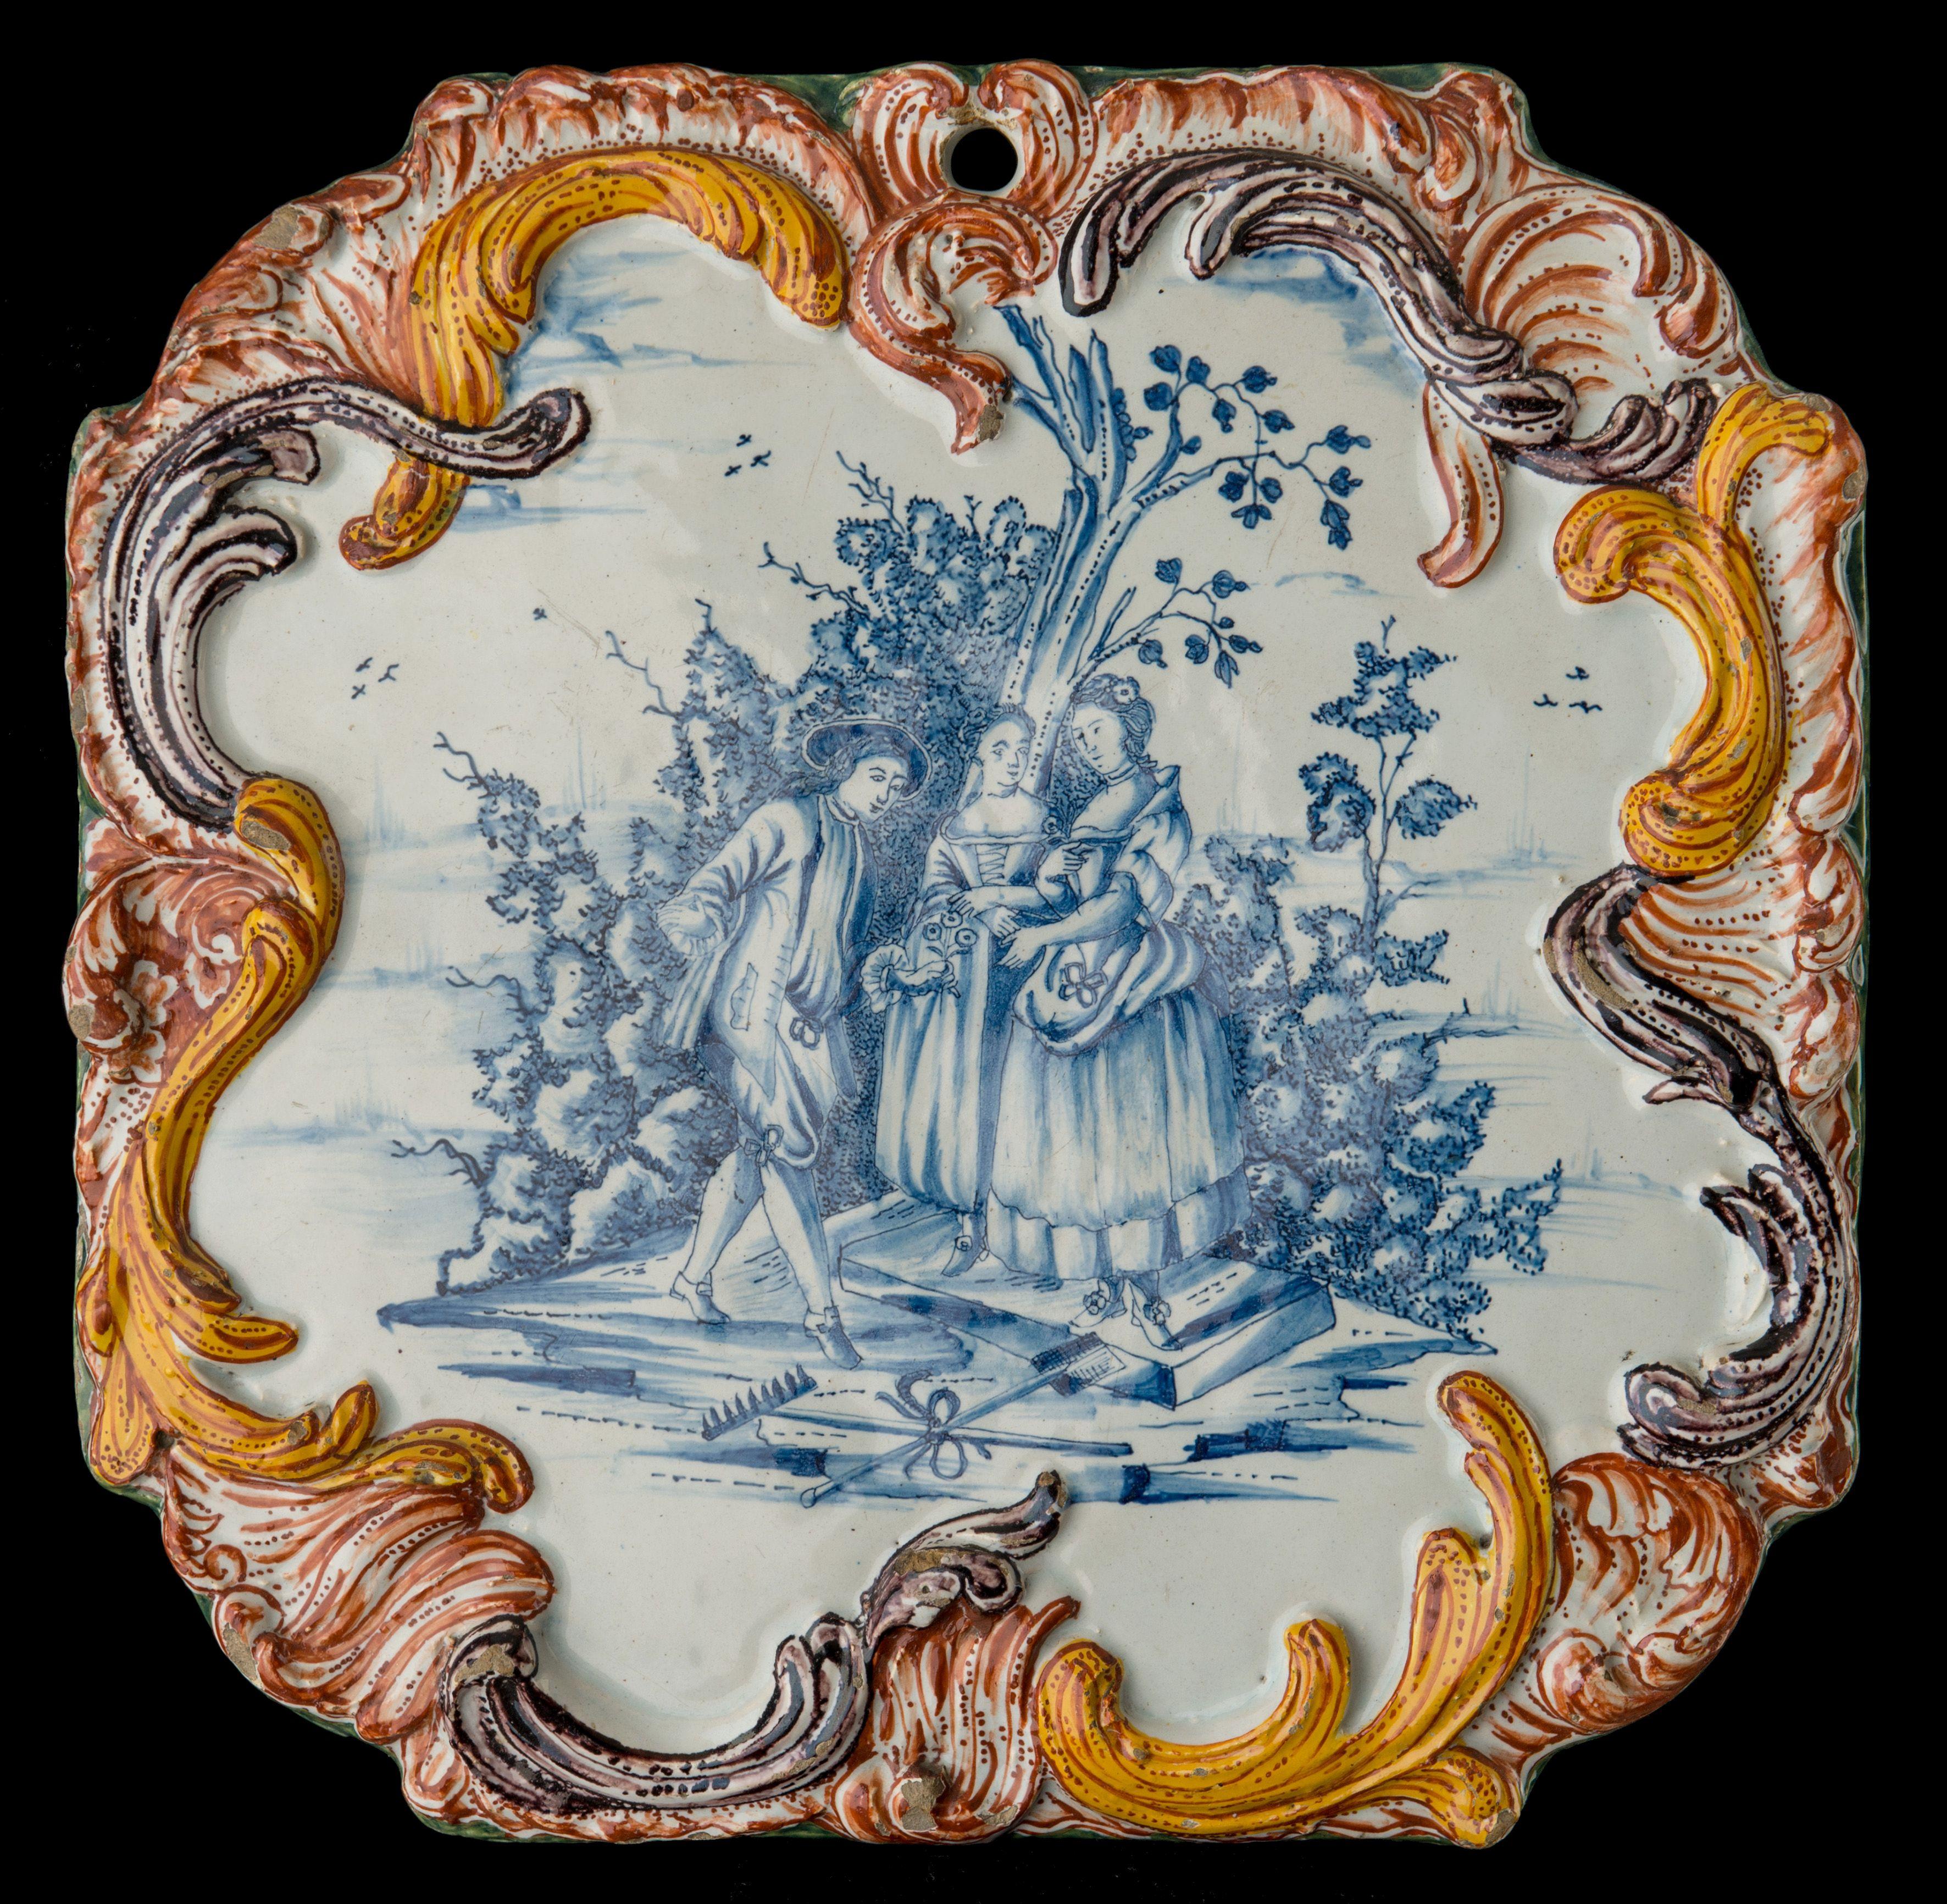 The octagonal plaque is painted in blue with a courteous scene. A young man offers a flower to a young lady accompanied by her chaperon, against a background of trees and shrubbery. On the foreground lie a rake and a shovel in cross shape, tied with